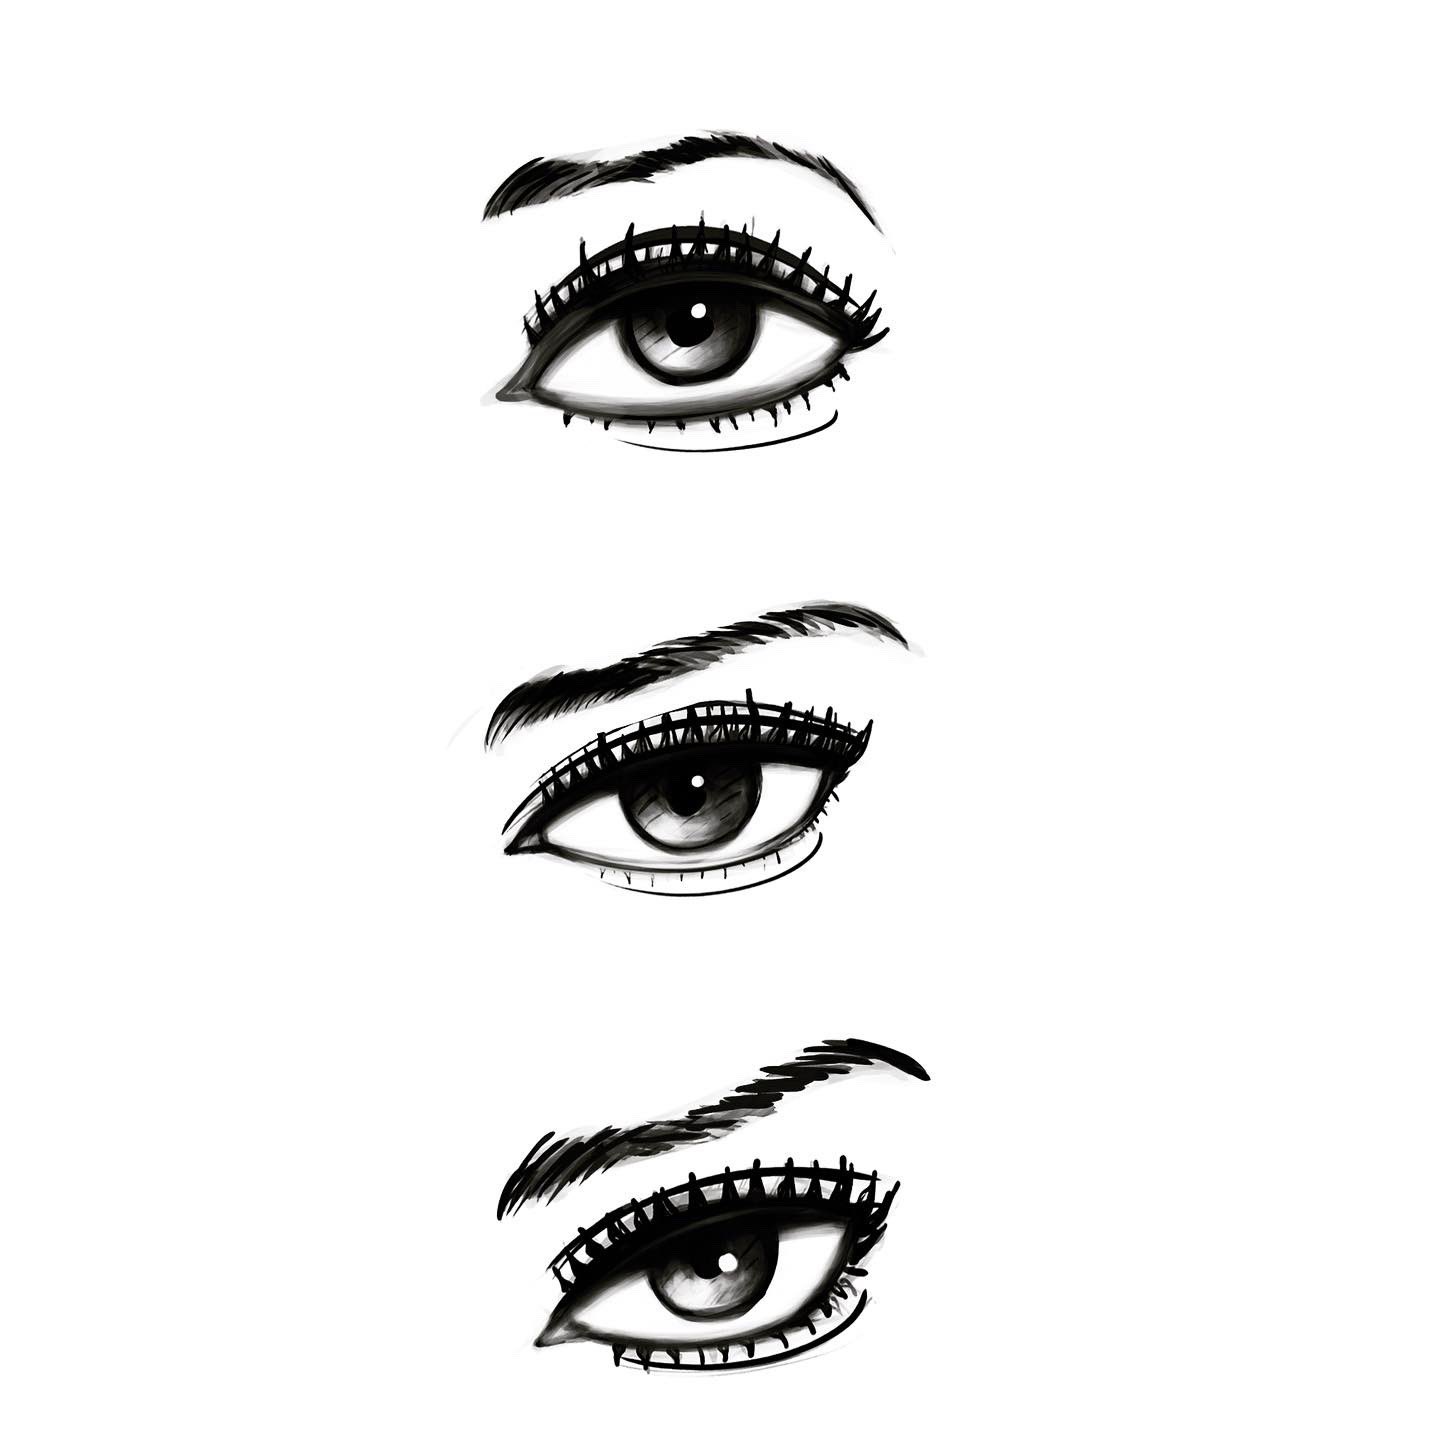 17 Inspiring and Creative Ideas for How to Draw Eyes  Moms Got the Stuff